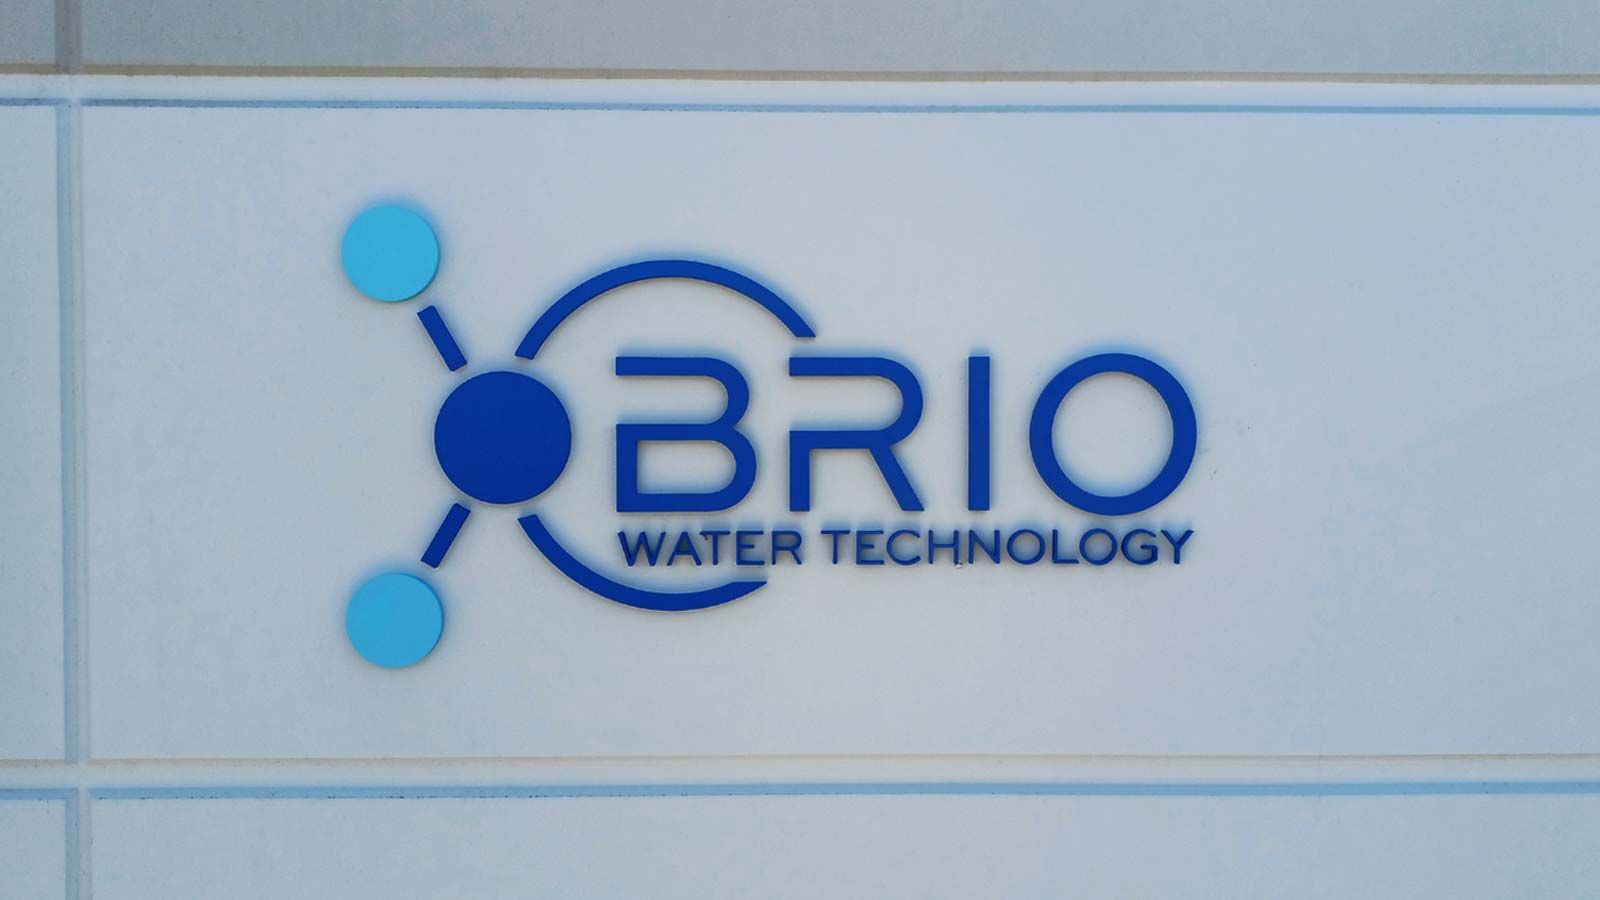 Brio Water Technology 3D letters attached to the wall